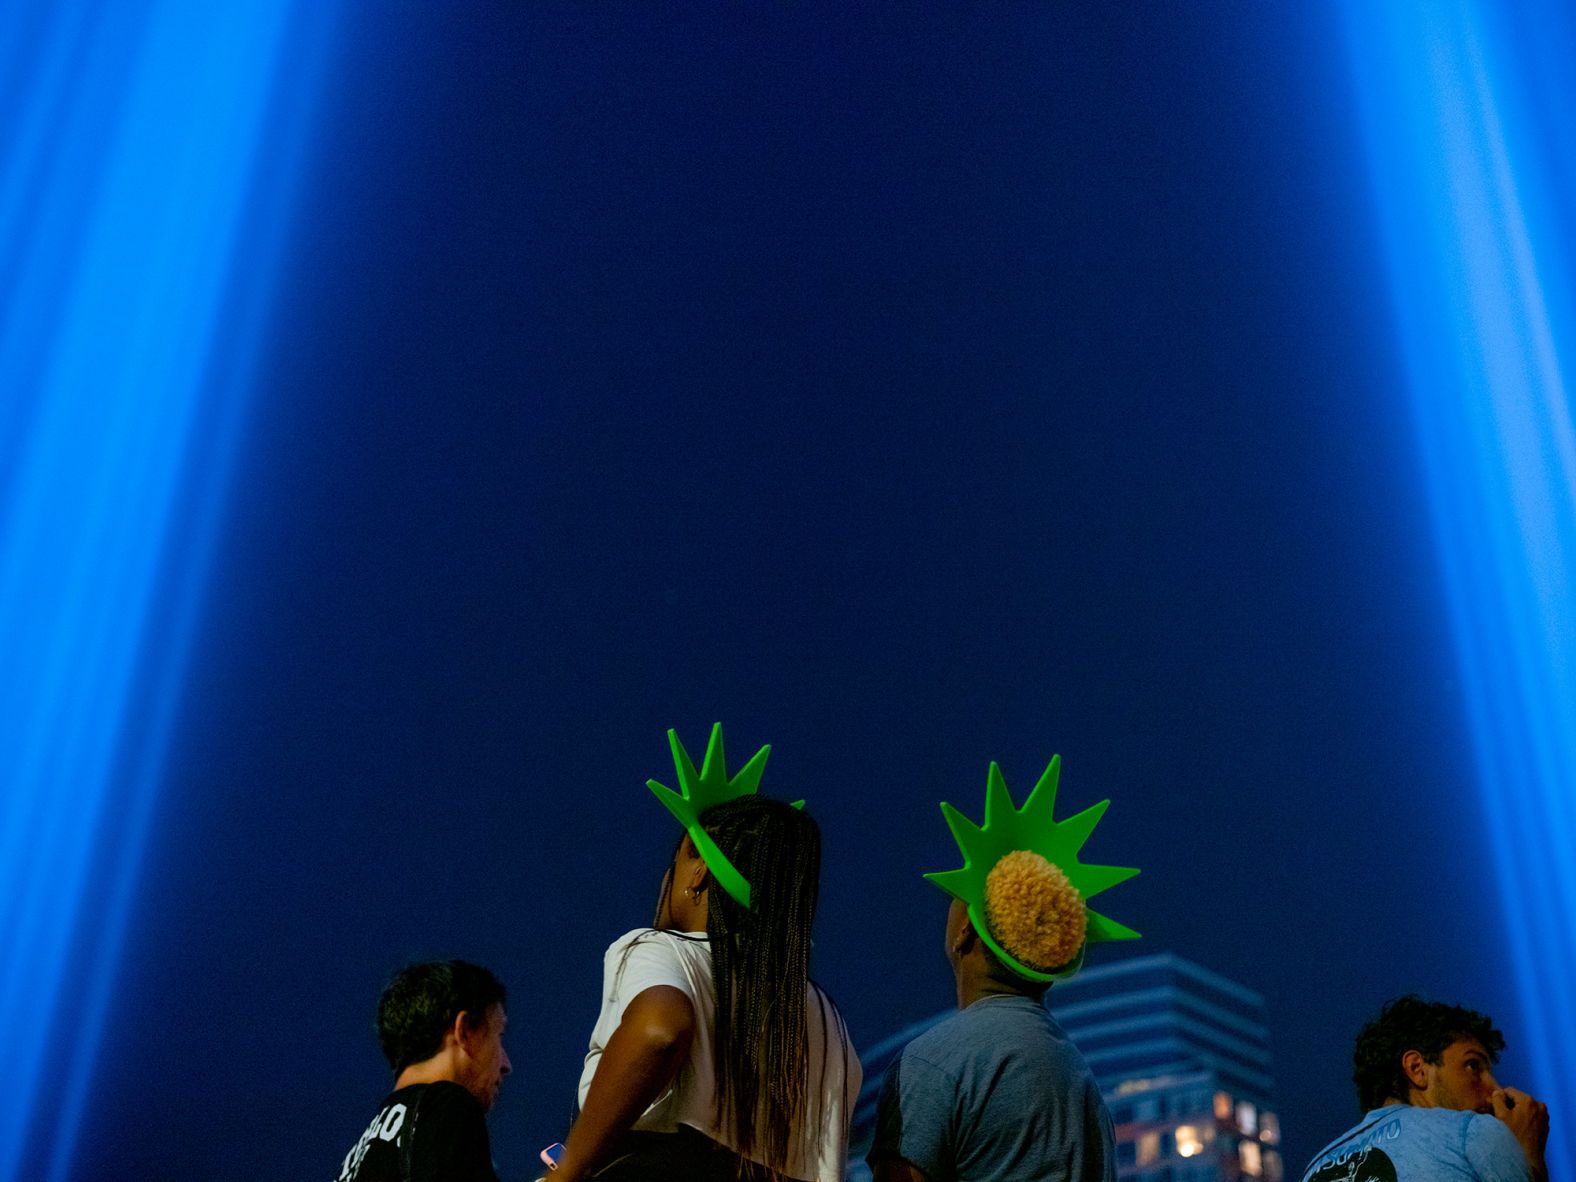 People observe the Tribute in Light memorial in New York from the top of a parking garage.